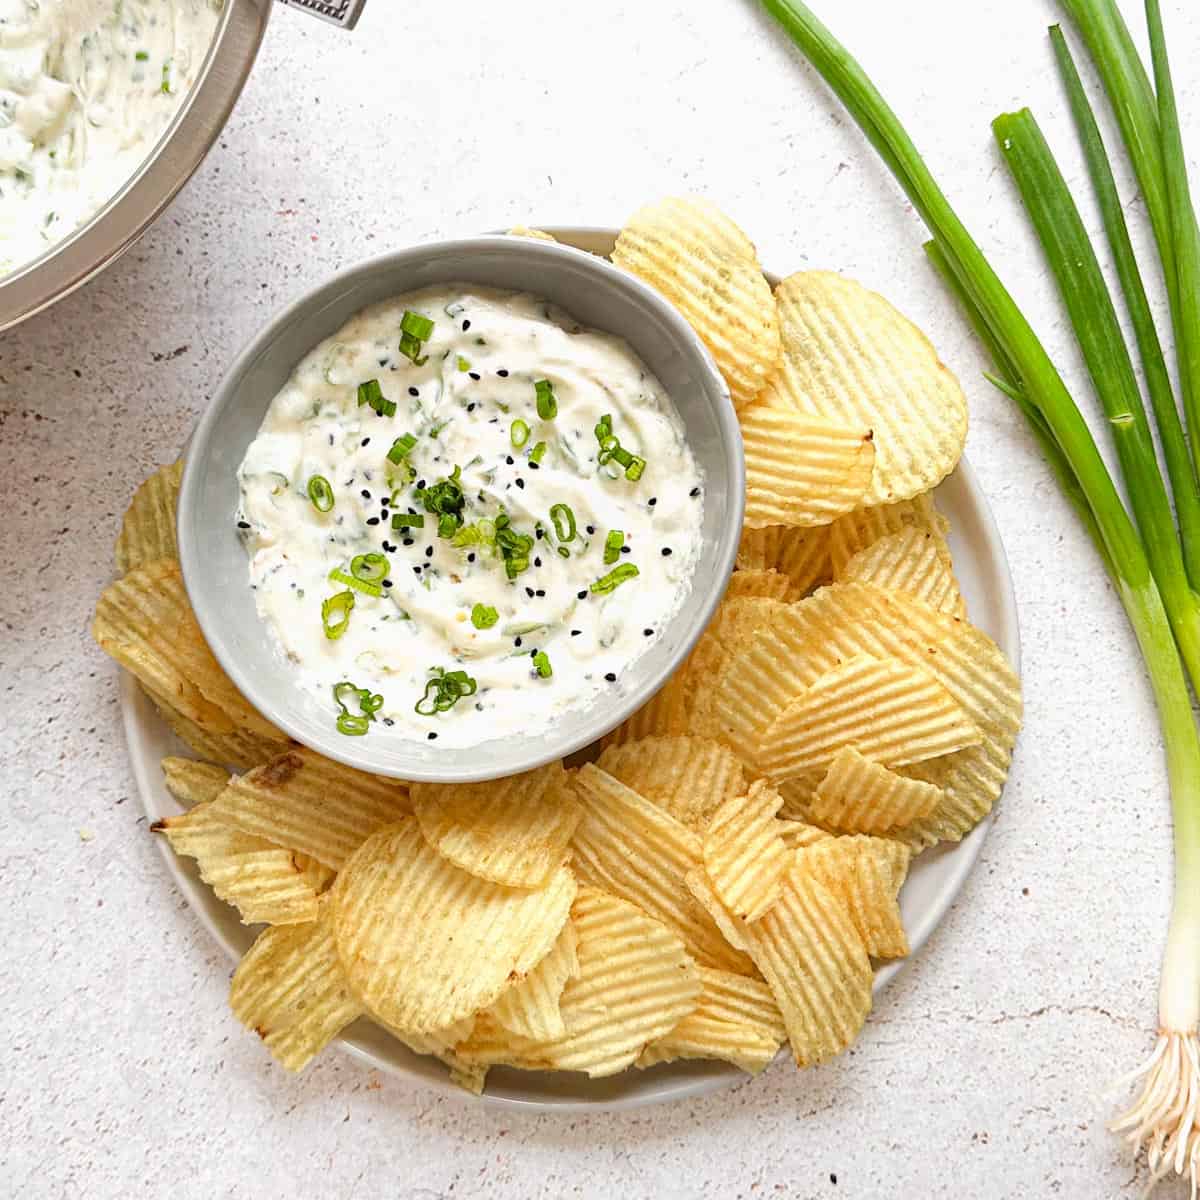 Sour cream and spring onion raita dip in a bowl with wavy potato chips plated along side it. Green onions in the background along with a bigger bowl of dip.